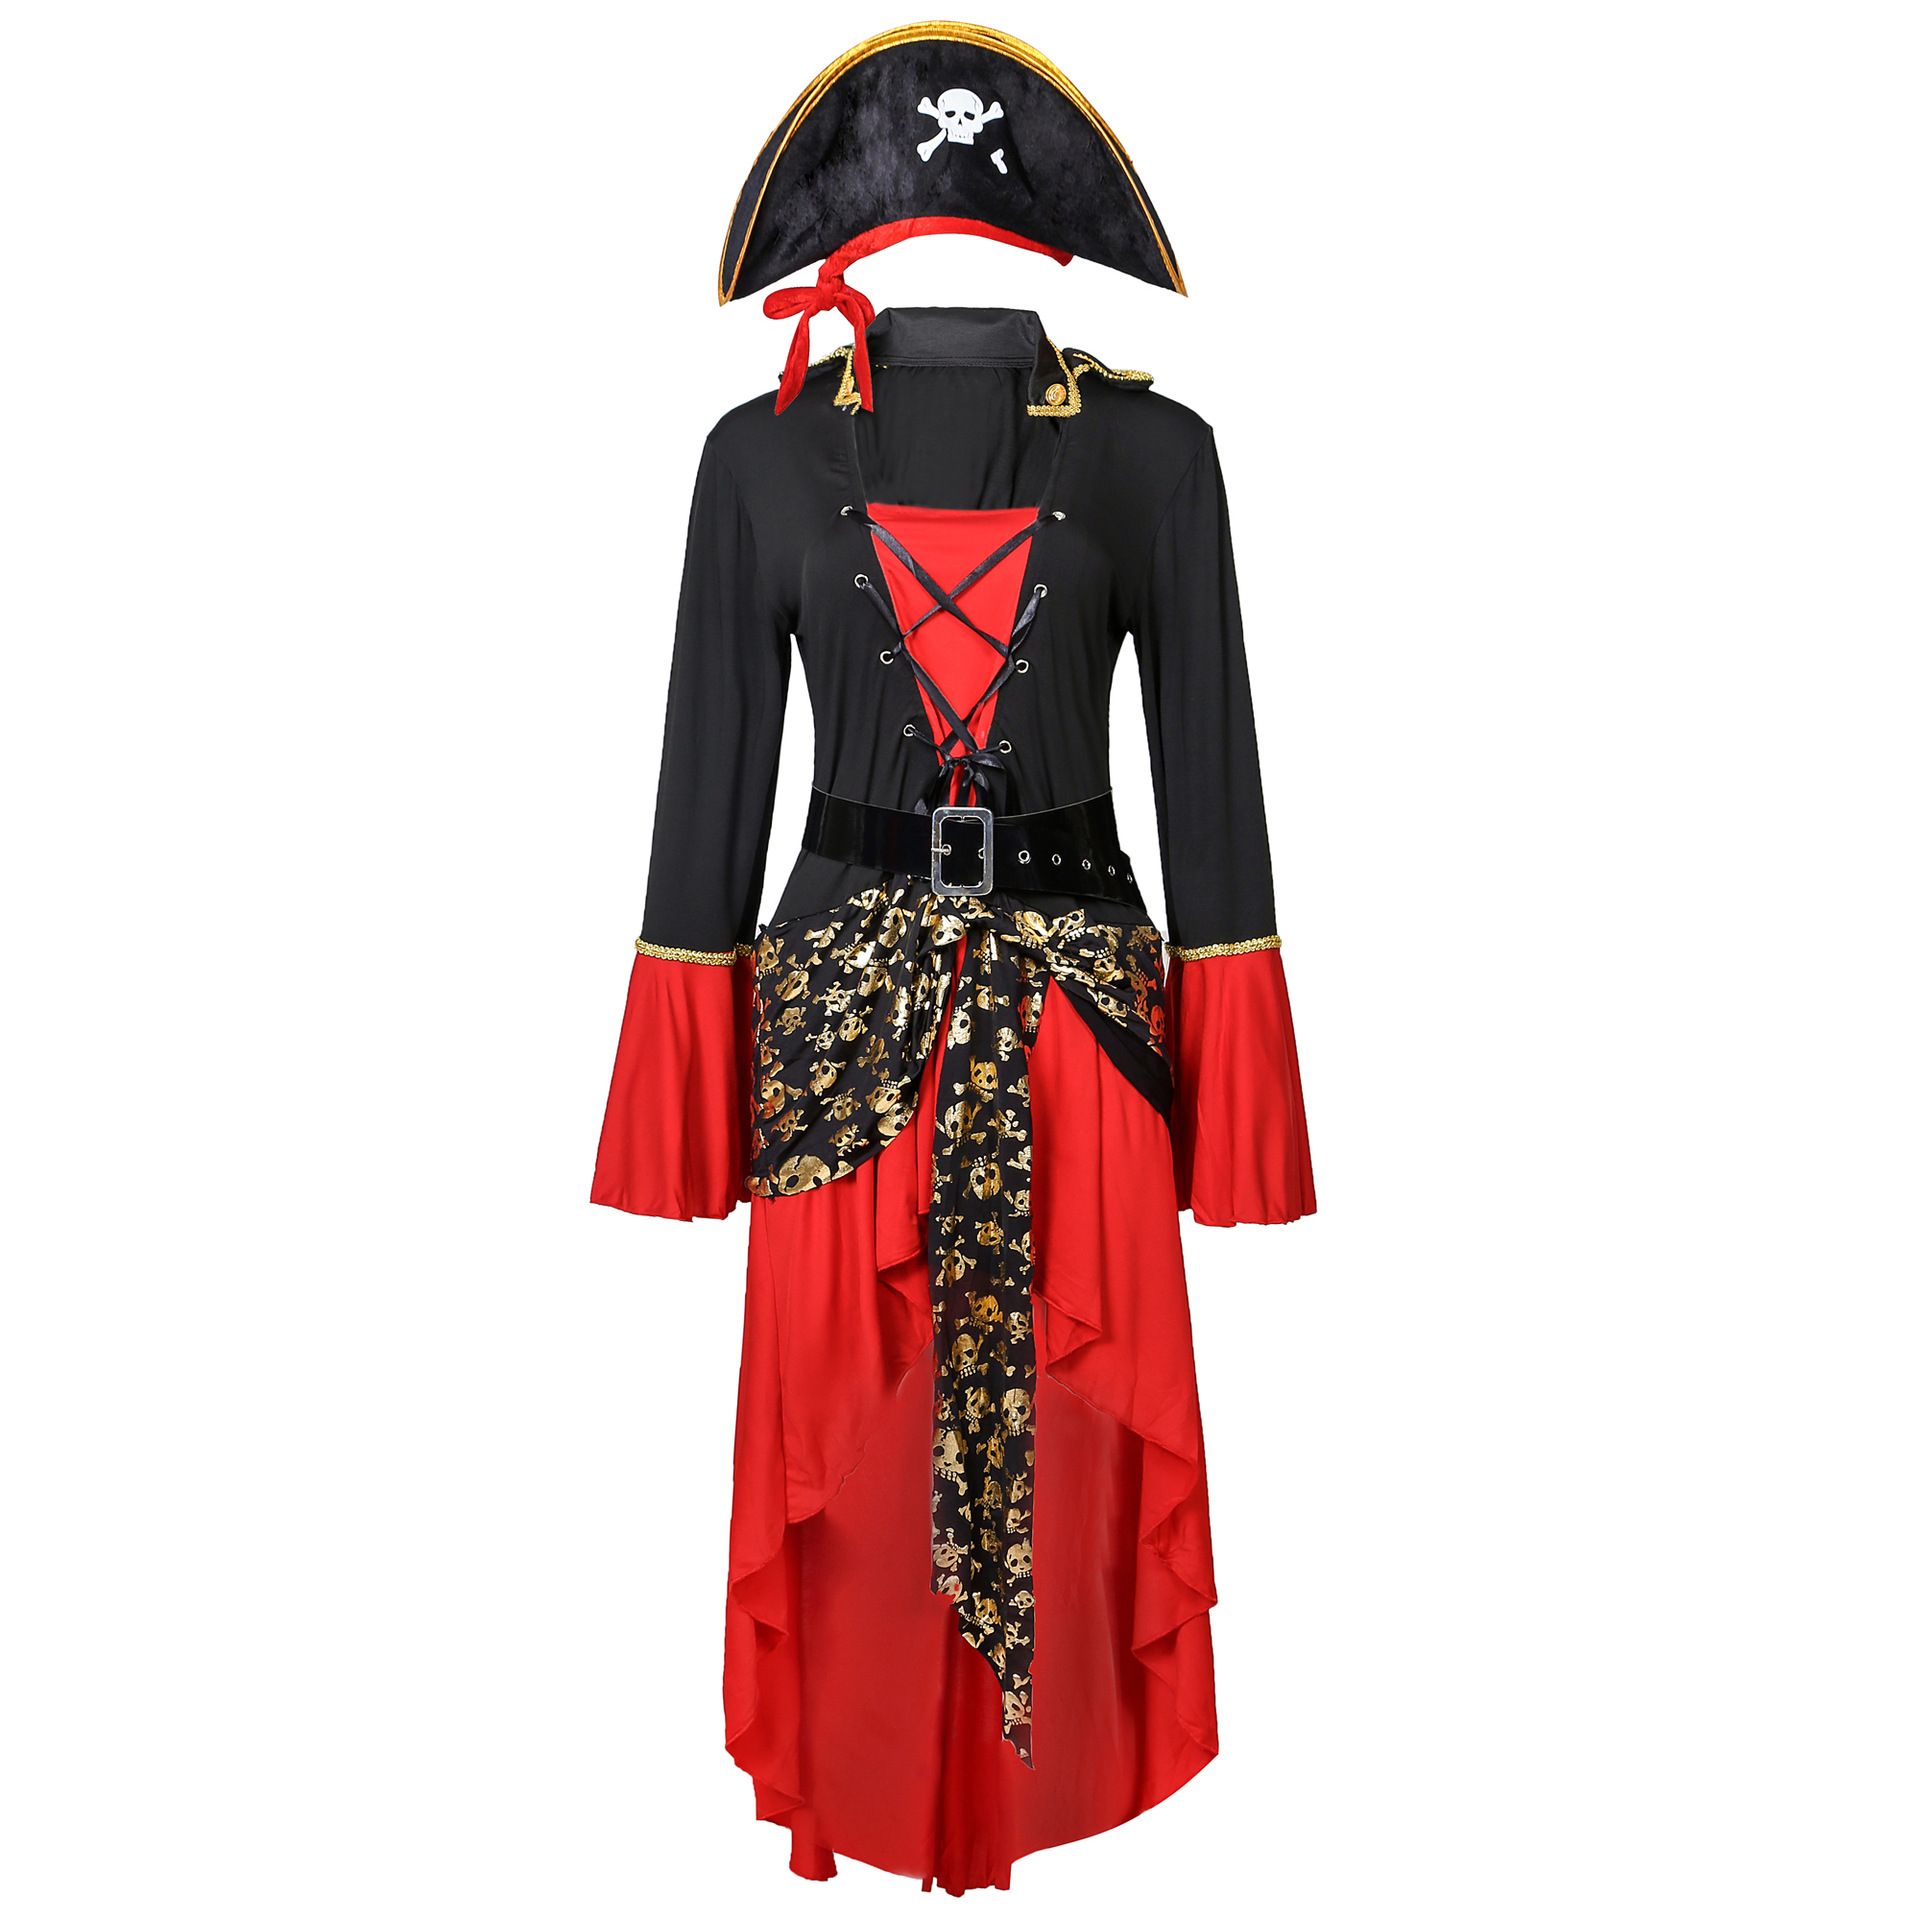 DIY Large Size European And American Sexy Female Pirate Costume Cosplay From Diyclothing, $933.97 DHgate pic image